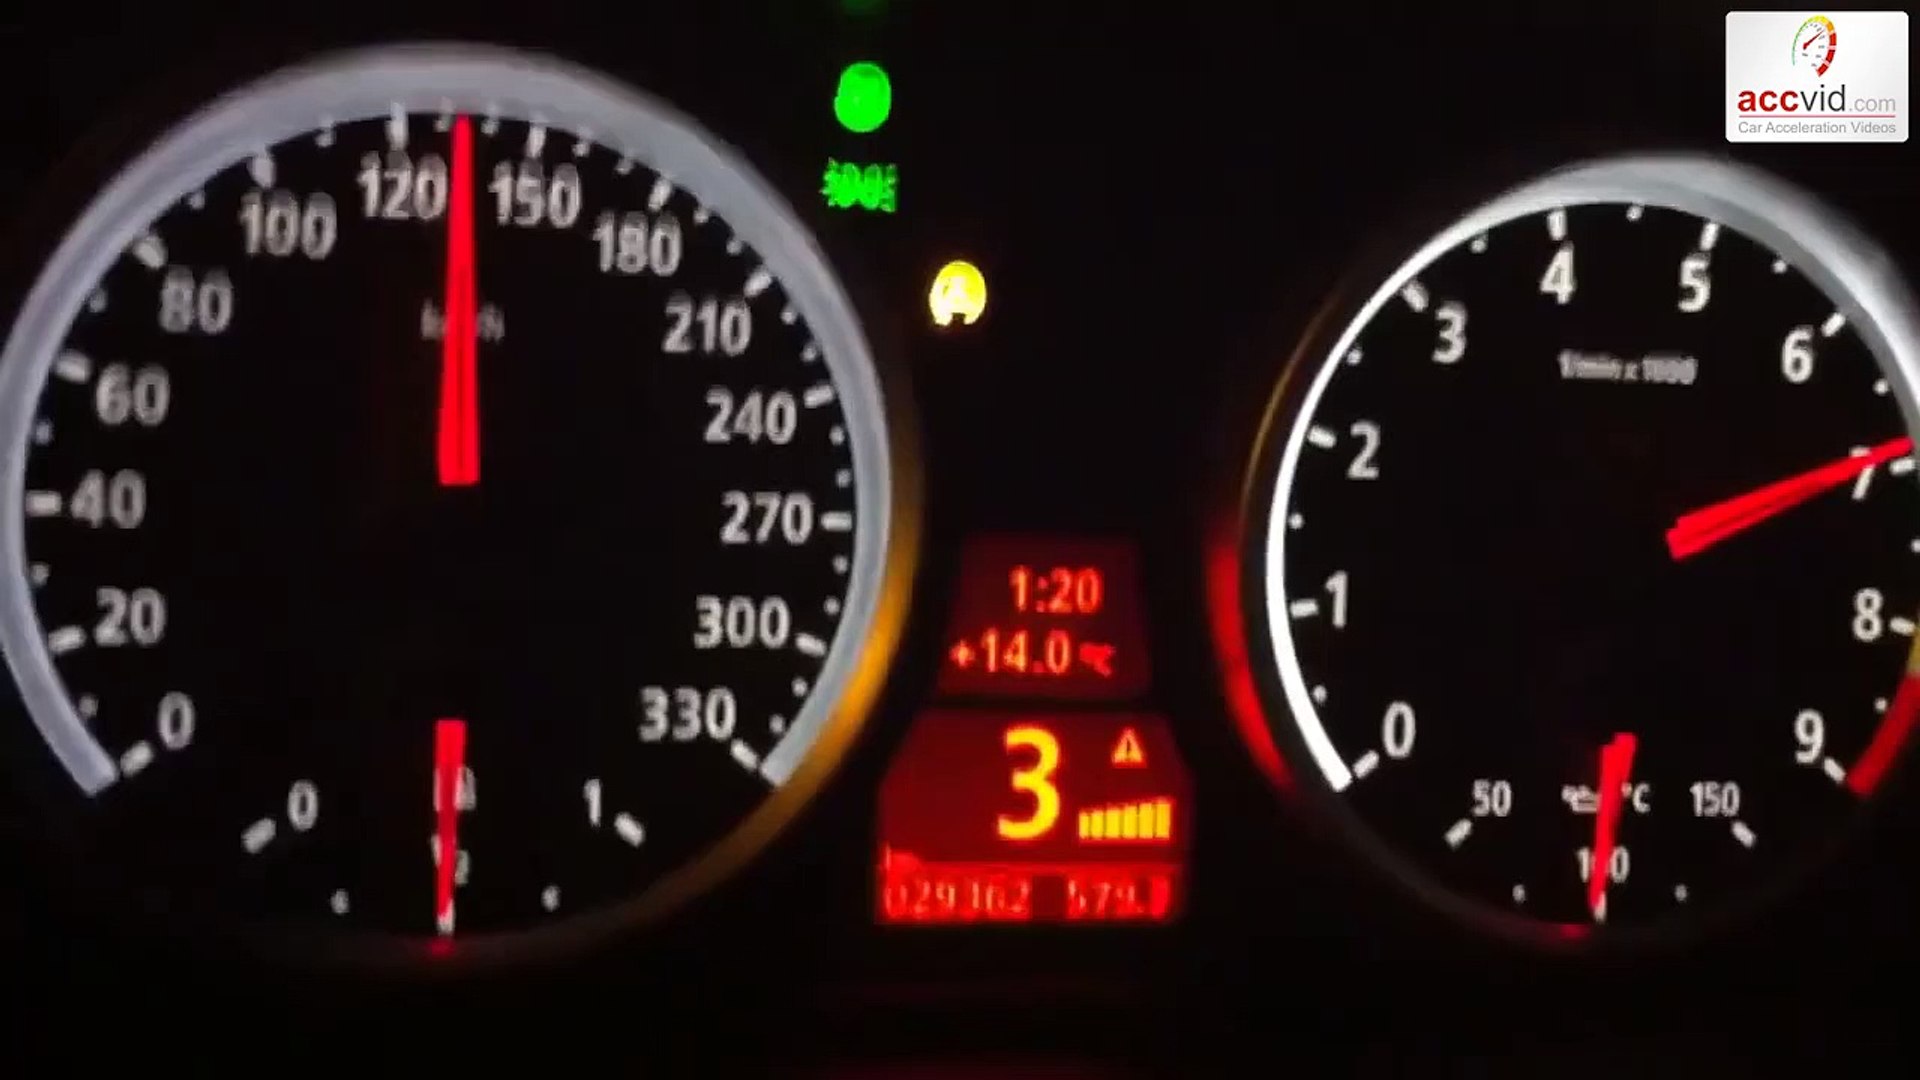 BMW M6 Gran Coupe Top Speed 330 kmh - BMW M6 Acceleration 0-330 - video  Dailymotion